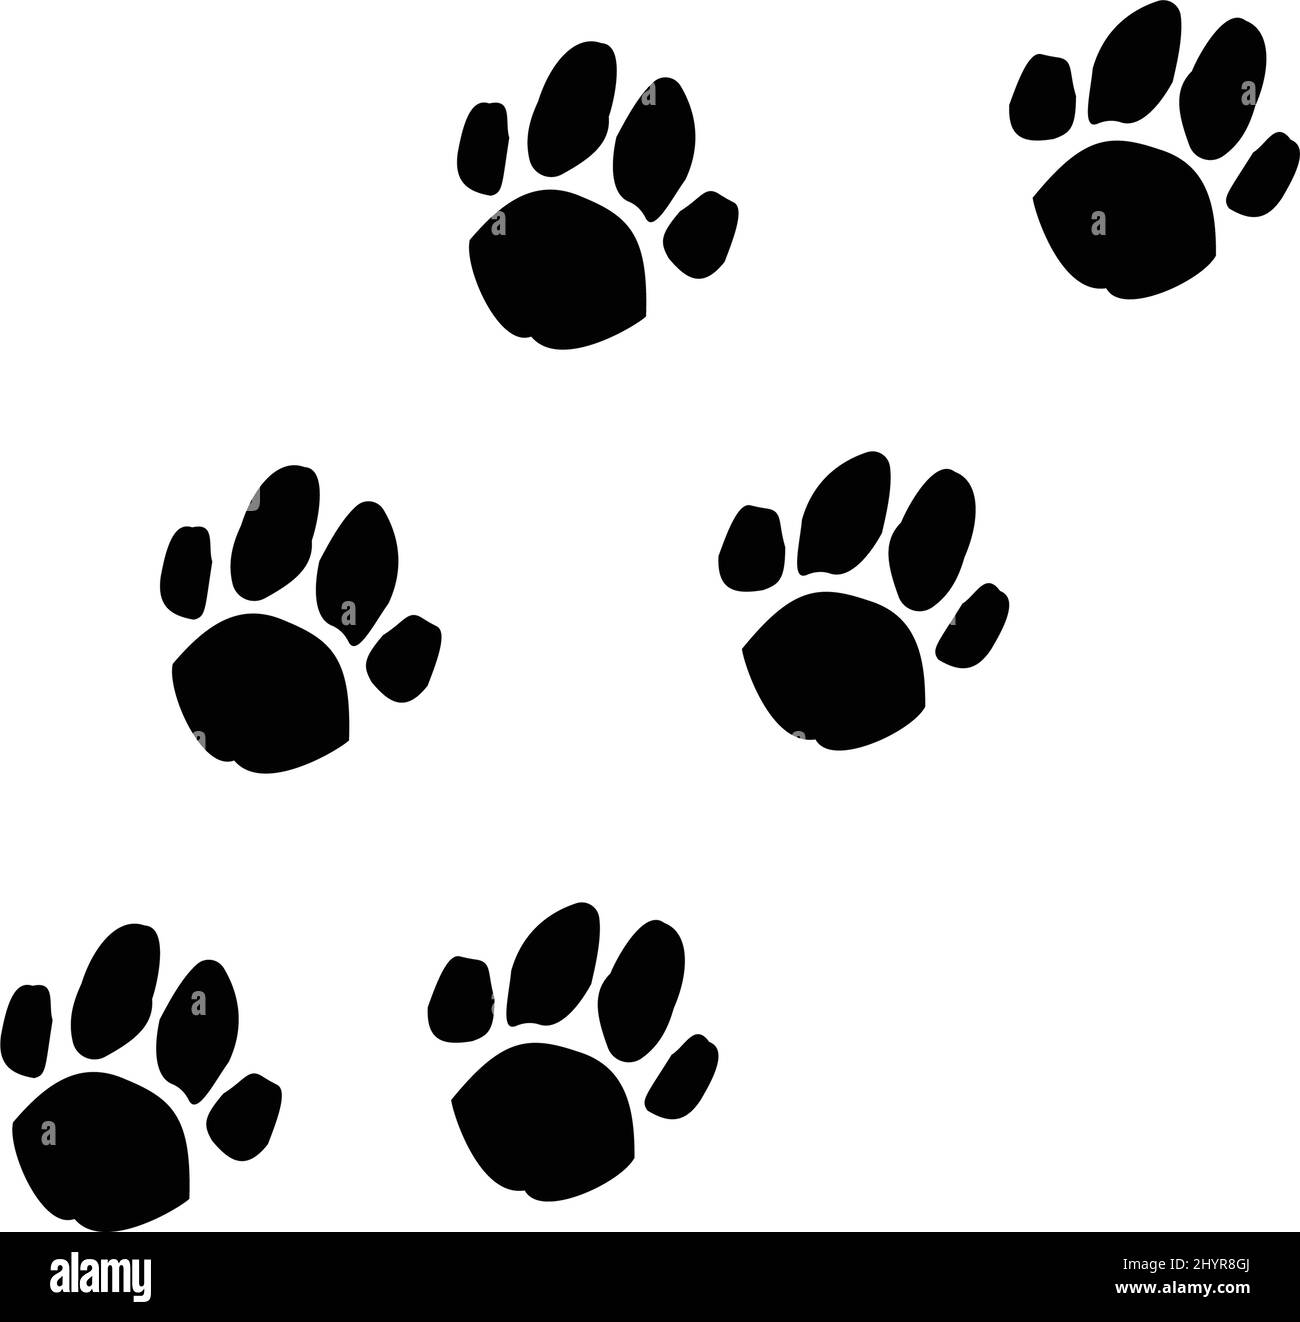 Animal tracks. Paw prints of cats and dogs. Editable vectors. Stock Vector